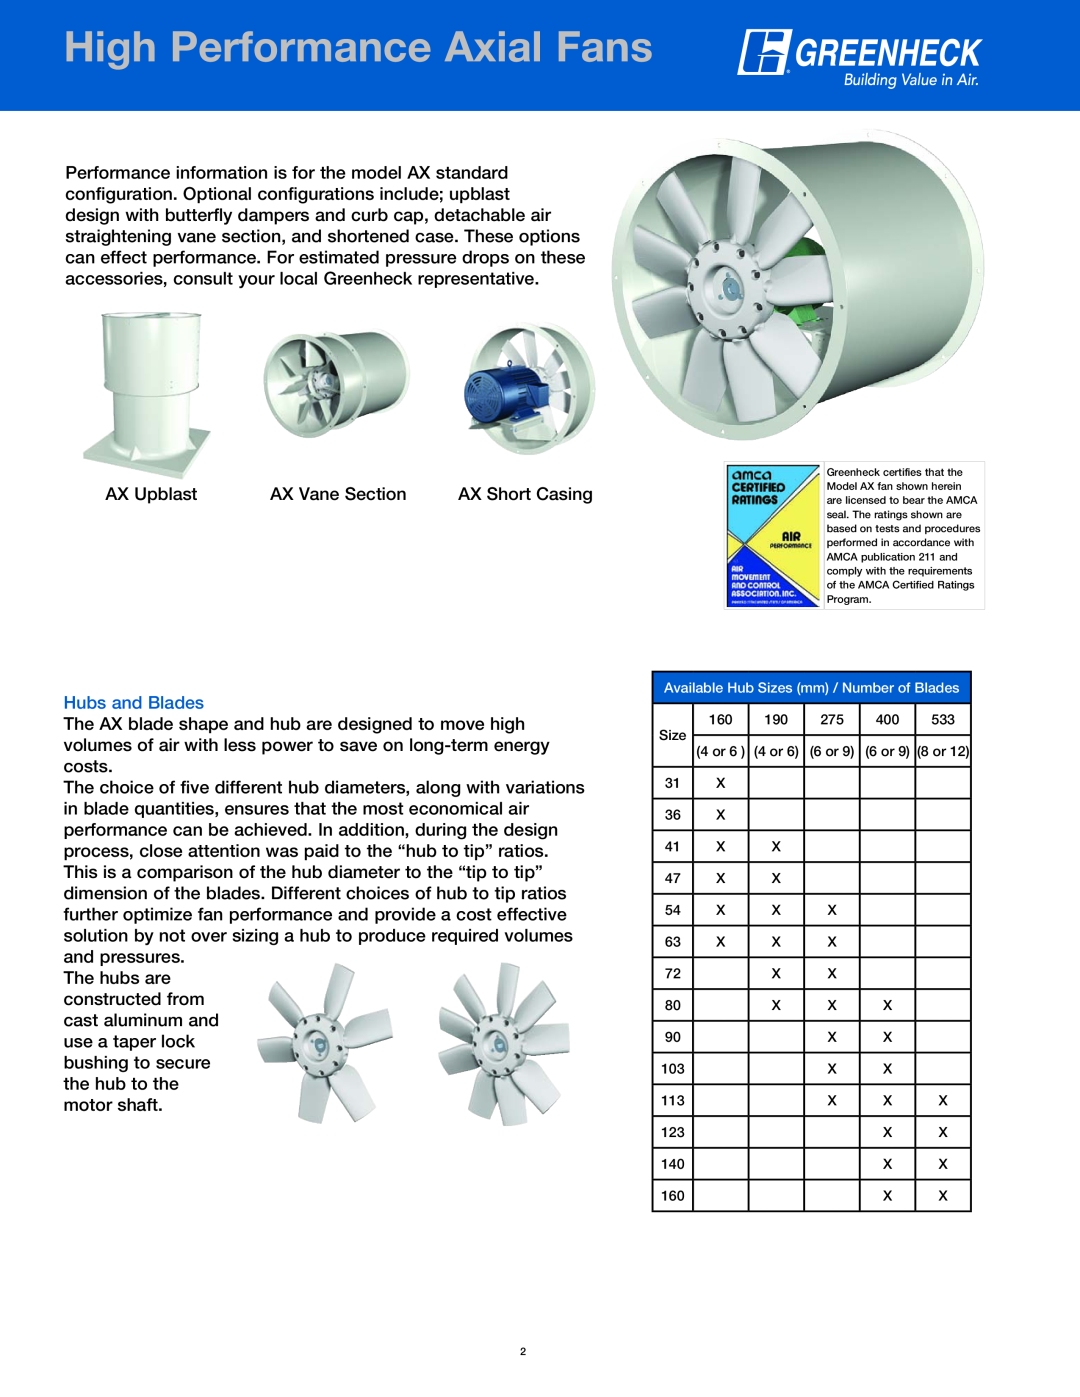 Greenheck Fan manual HighPagePerformanceHeader Axial Fans, Hubs and Blades 